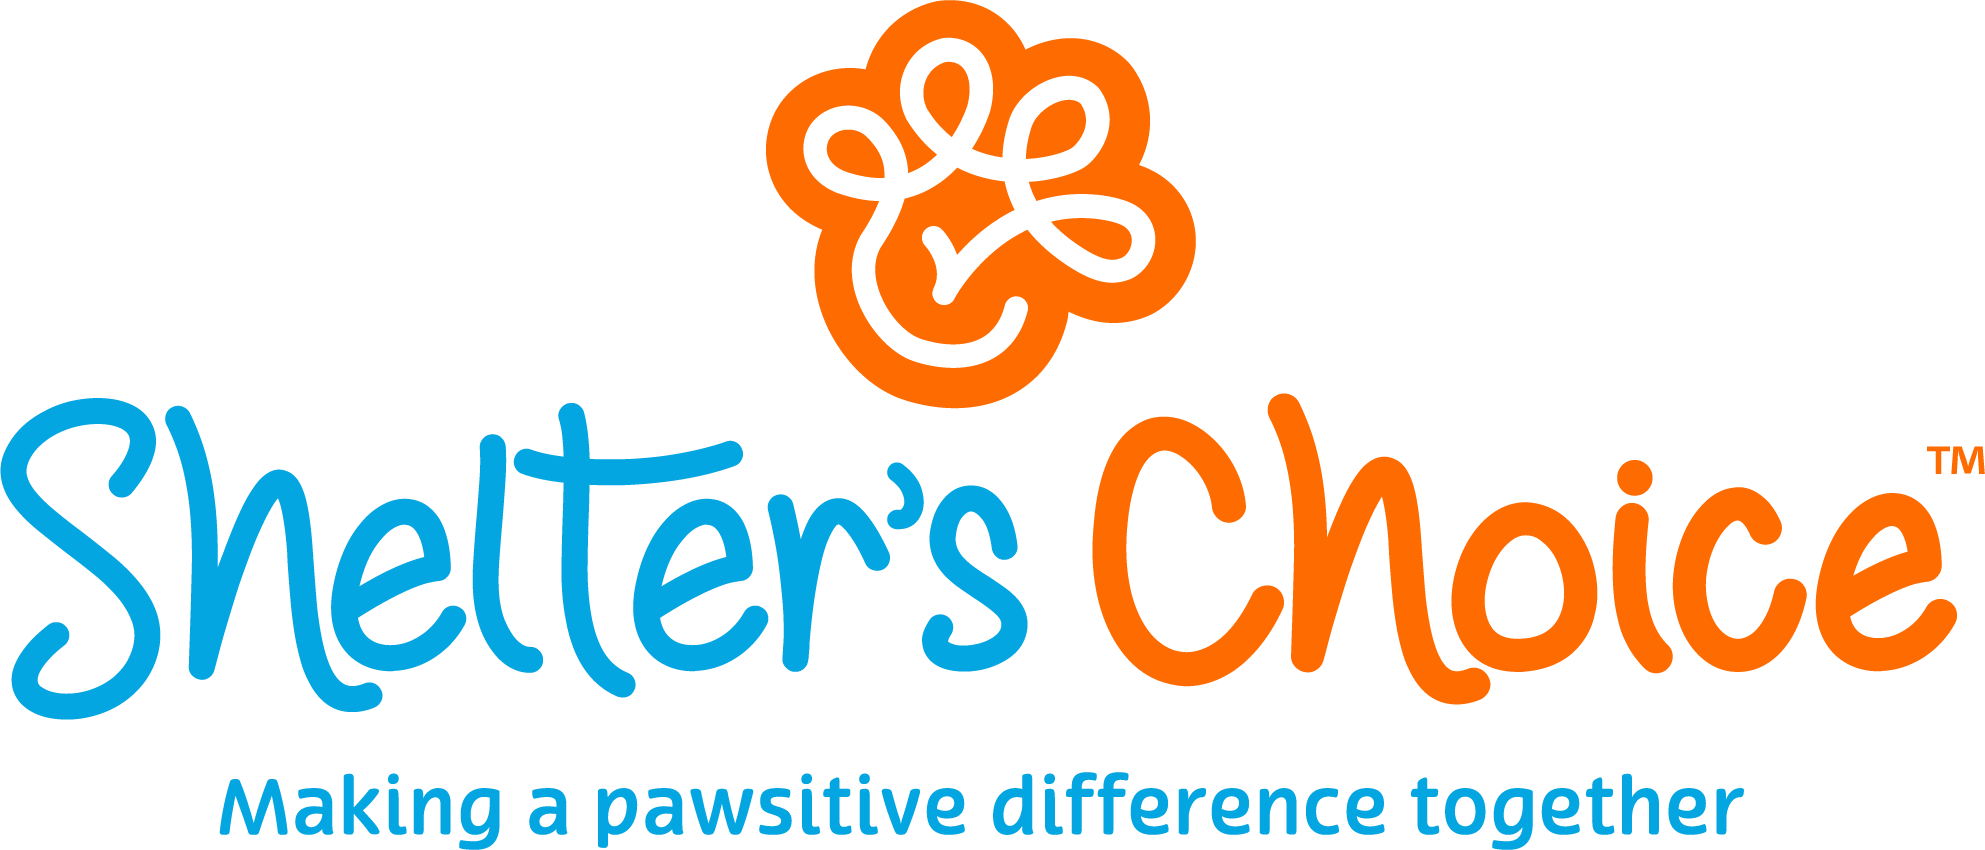 Blue and orange Shelter's Choice logo with the slogan Making a pawsitive difference together